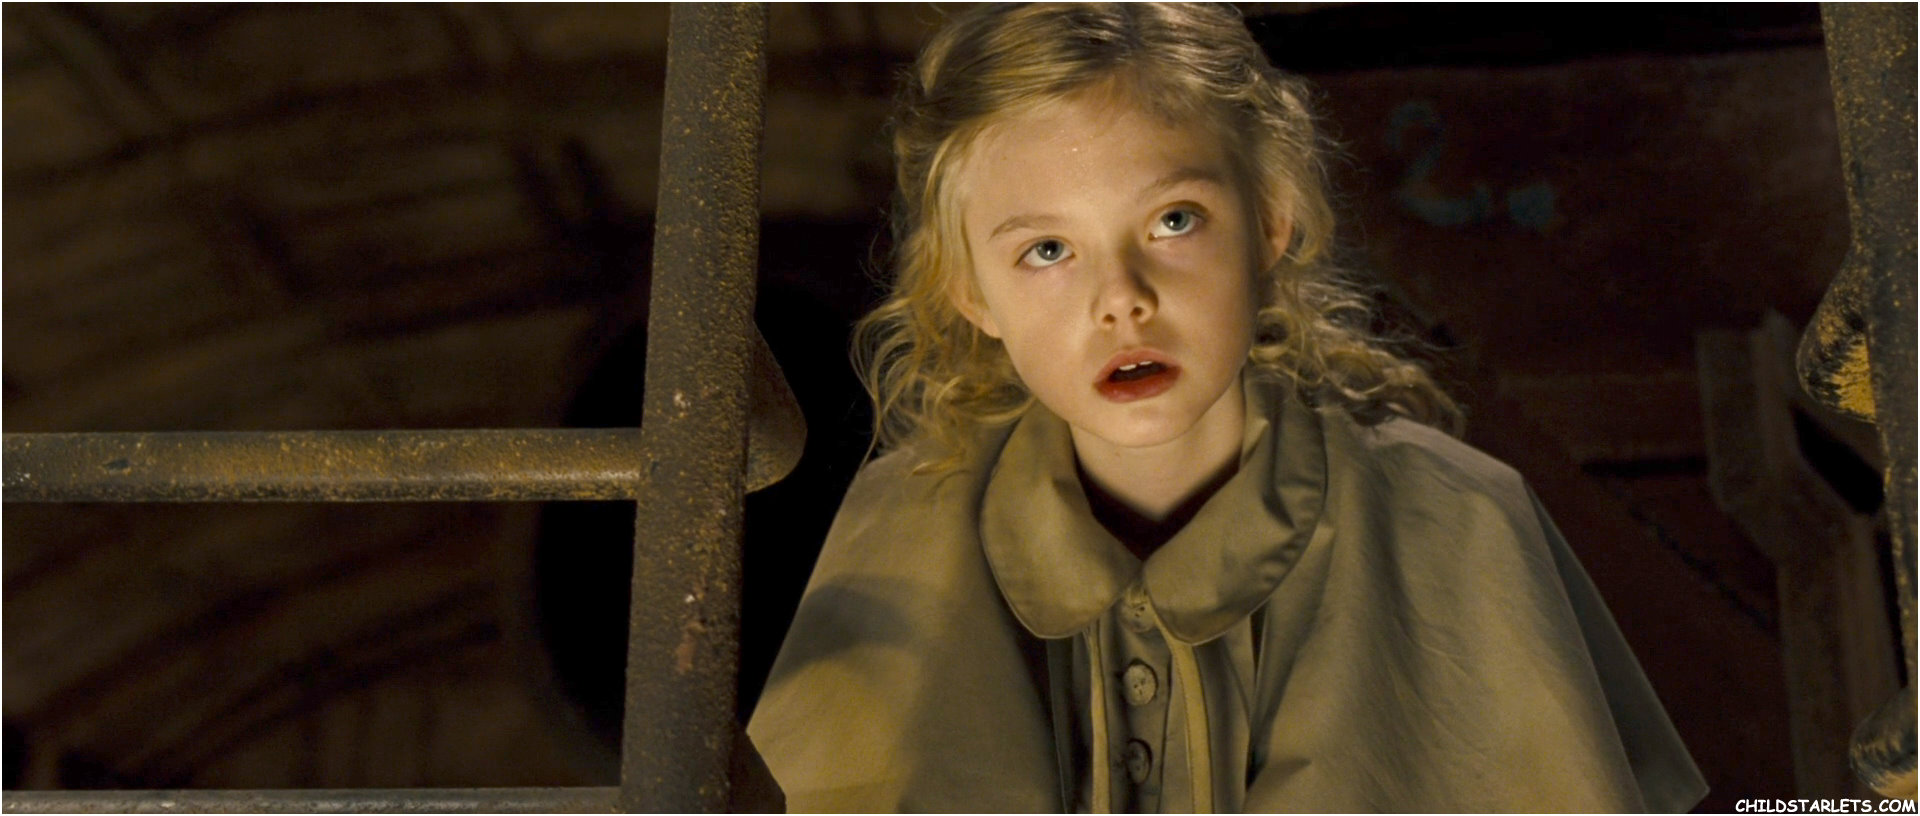 Elle Fanning Child Actress Images/Pictures/Photos/Videos Gallery - CHILDSTARLETS.COM1920 x 816